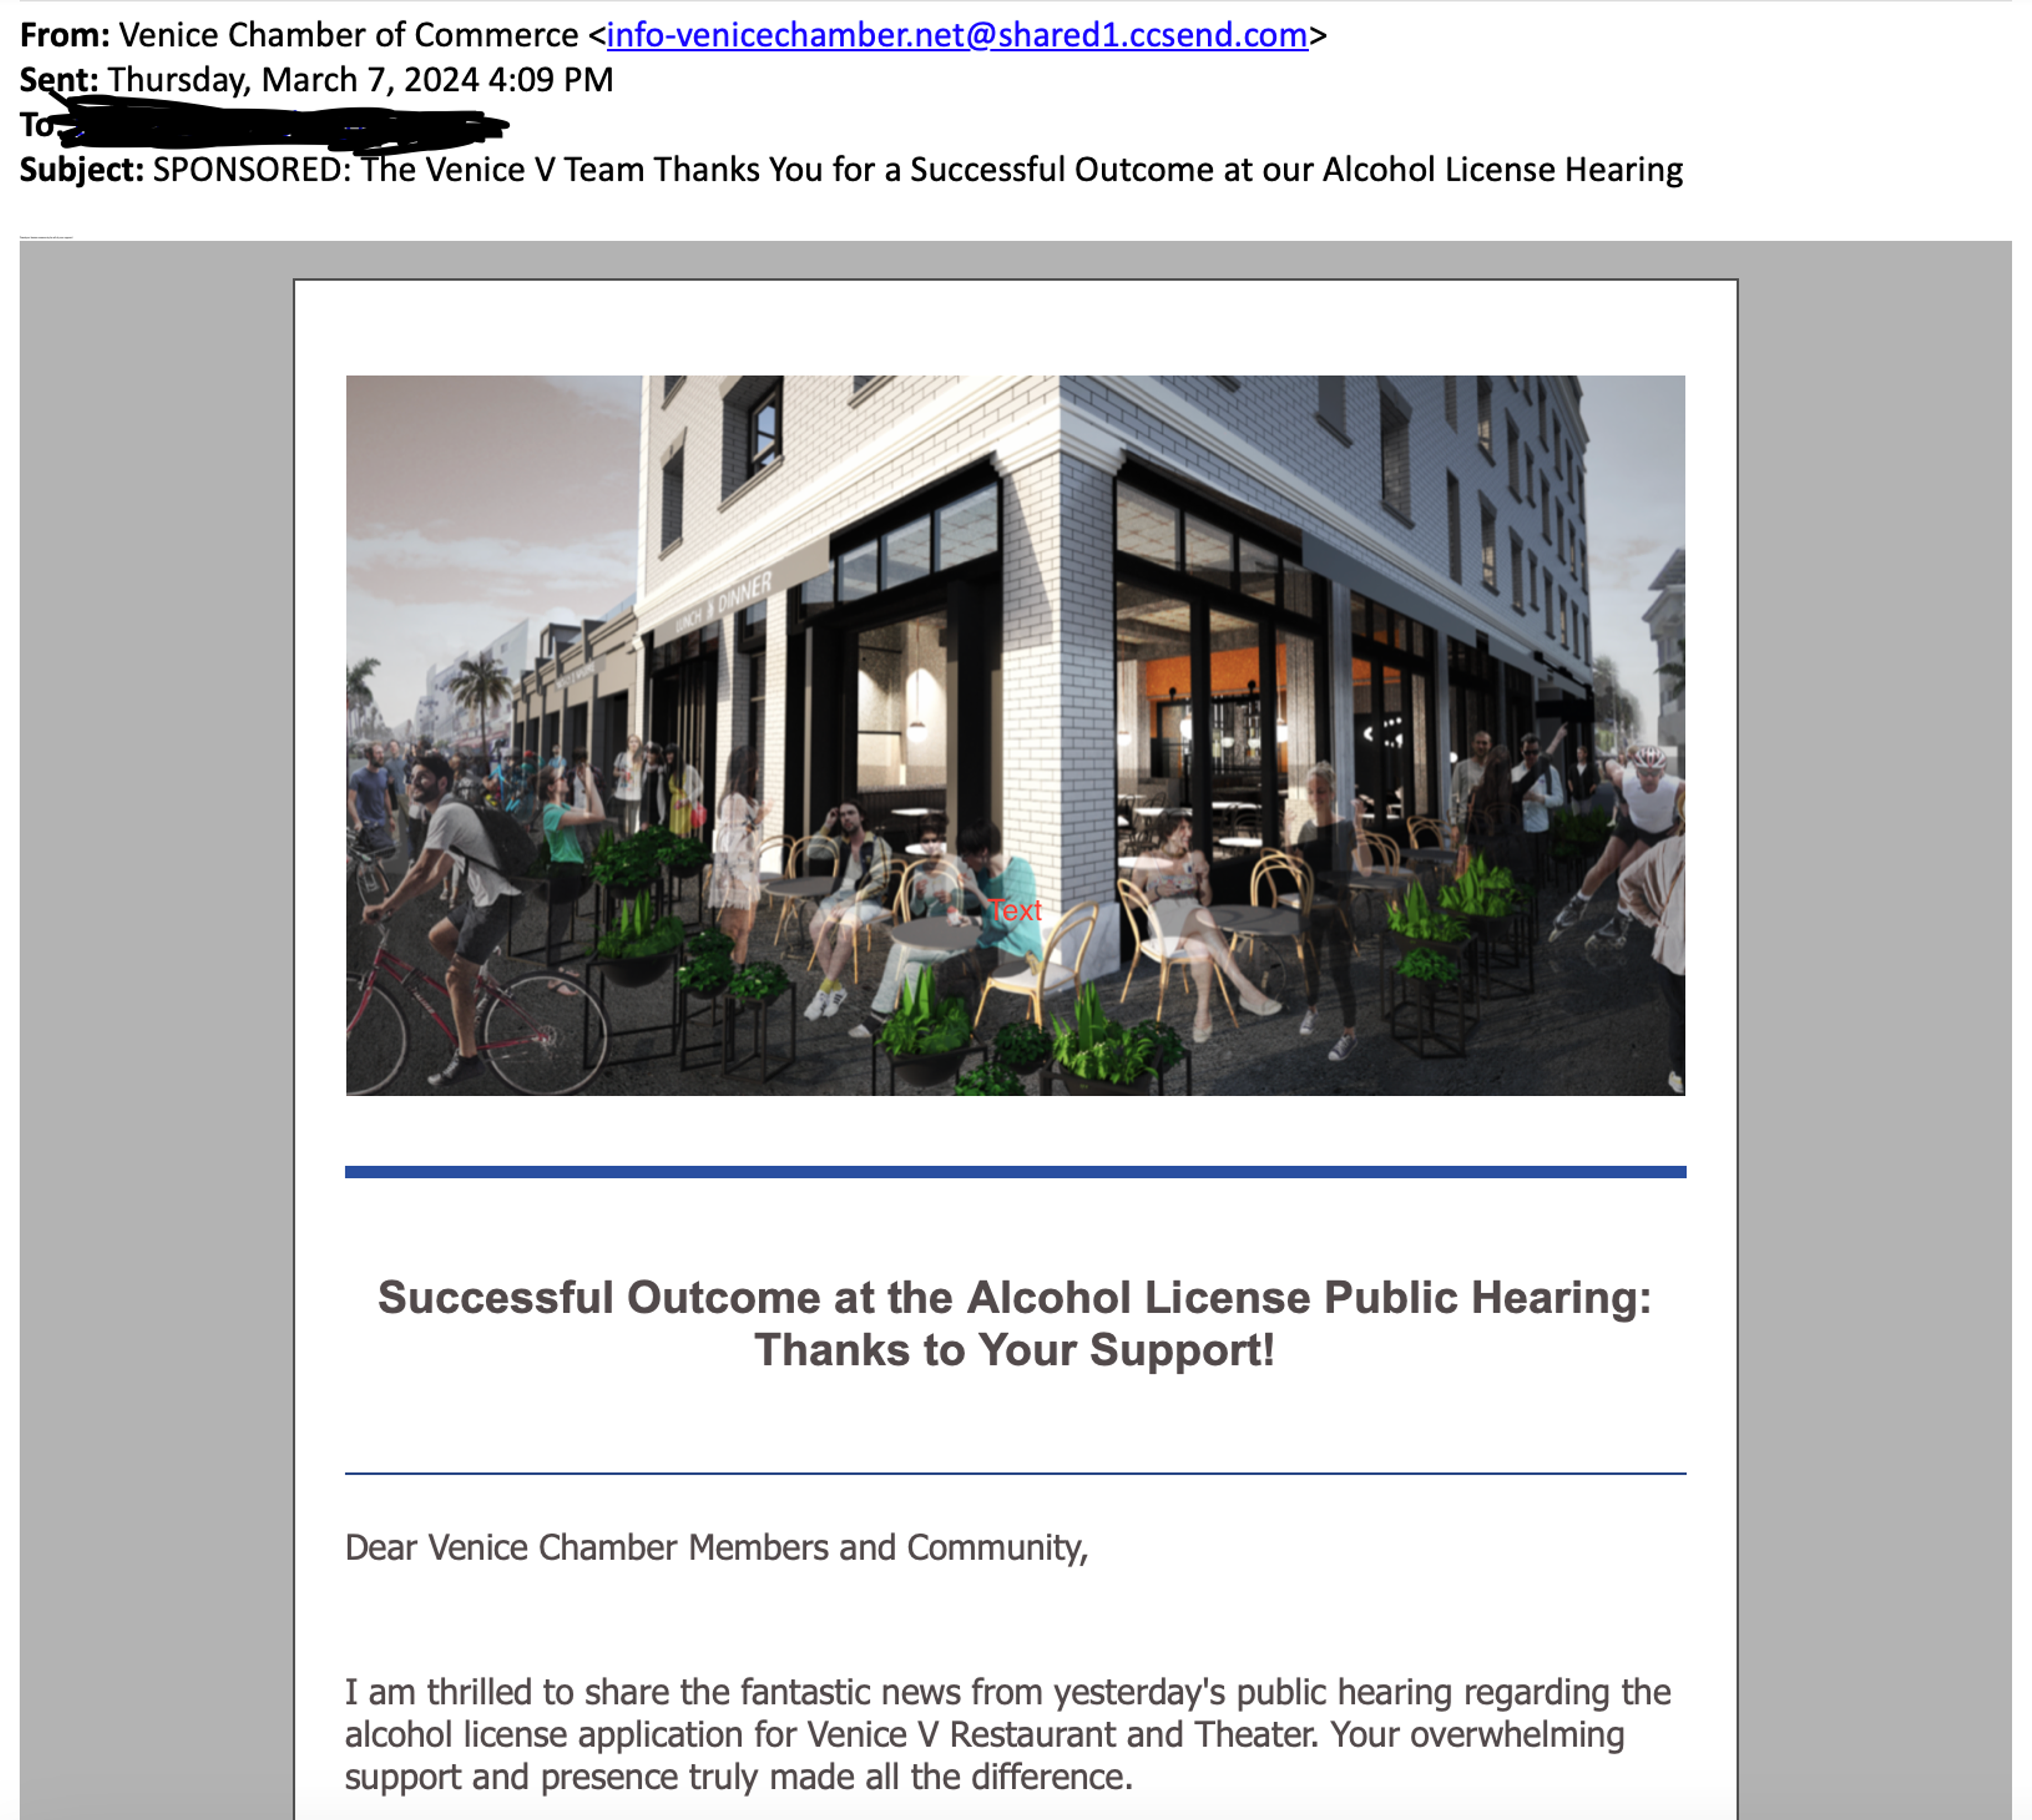 Revolting email from the Venice Chamber of Commerce, bragging about securing an alcohol license and Conditional Use Permit despite the Waldorf/Venice V being RSO housing